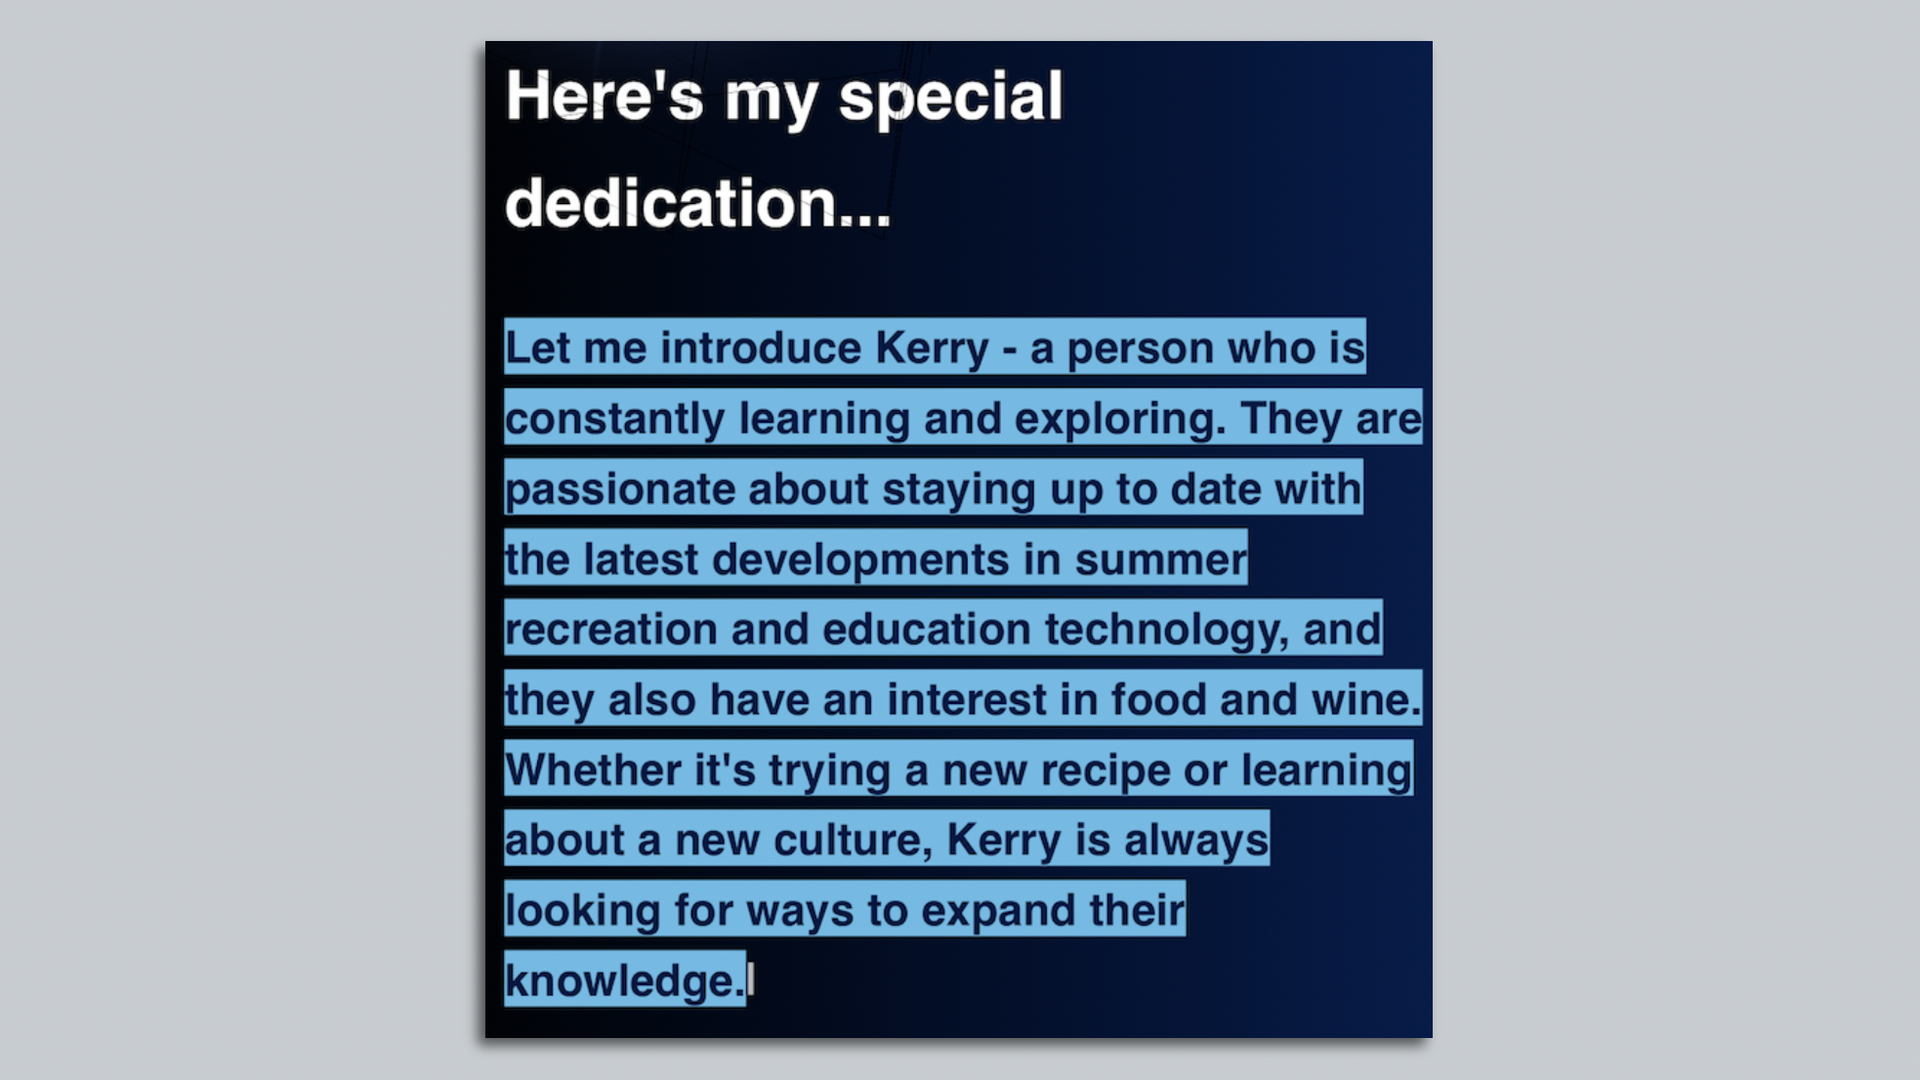 Here's my special dedication: "Let me introduce Kerry - a person who is constantly learning and exploring."